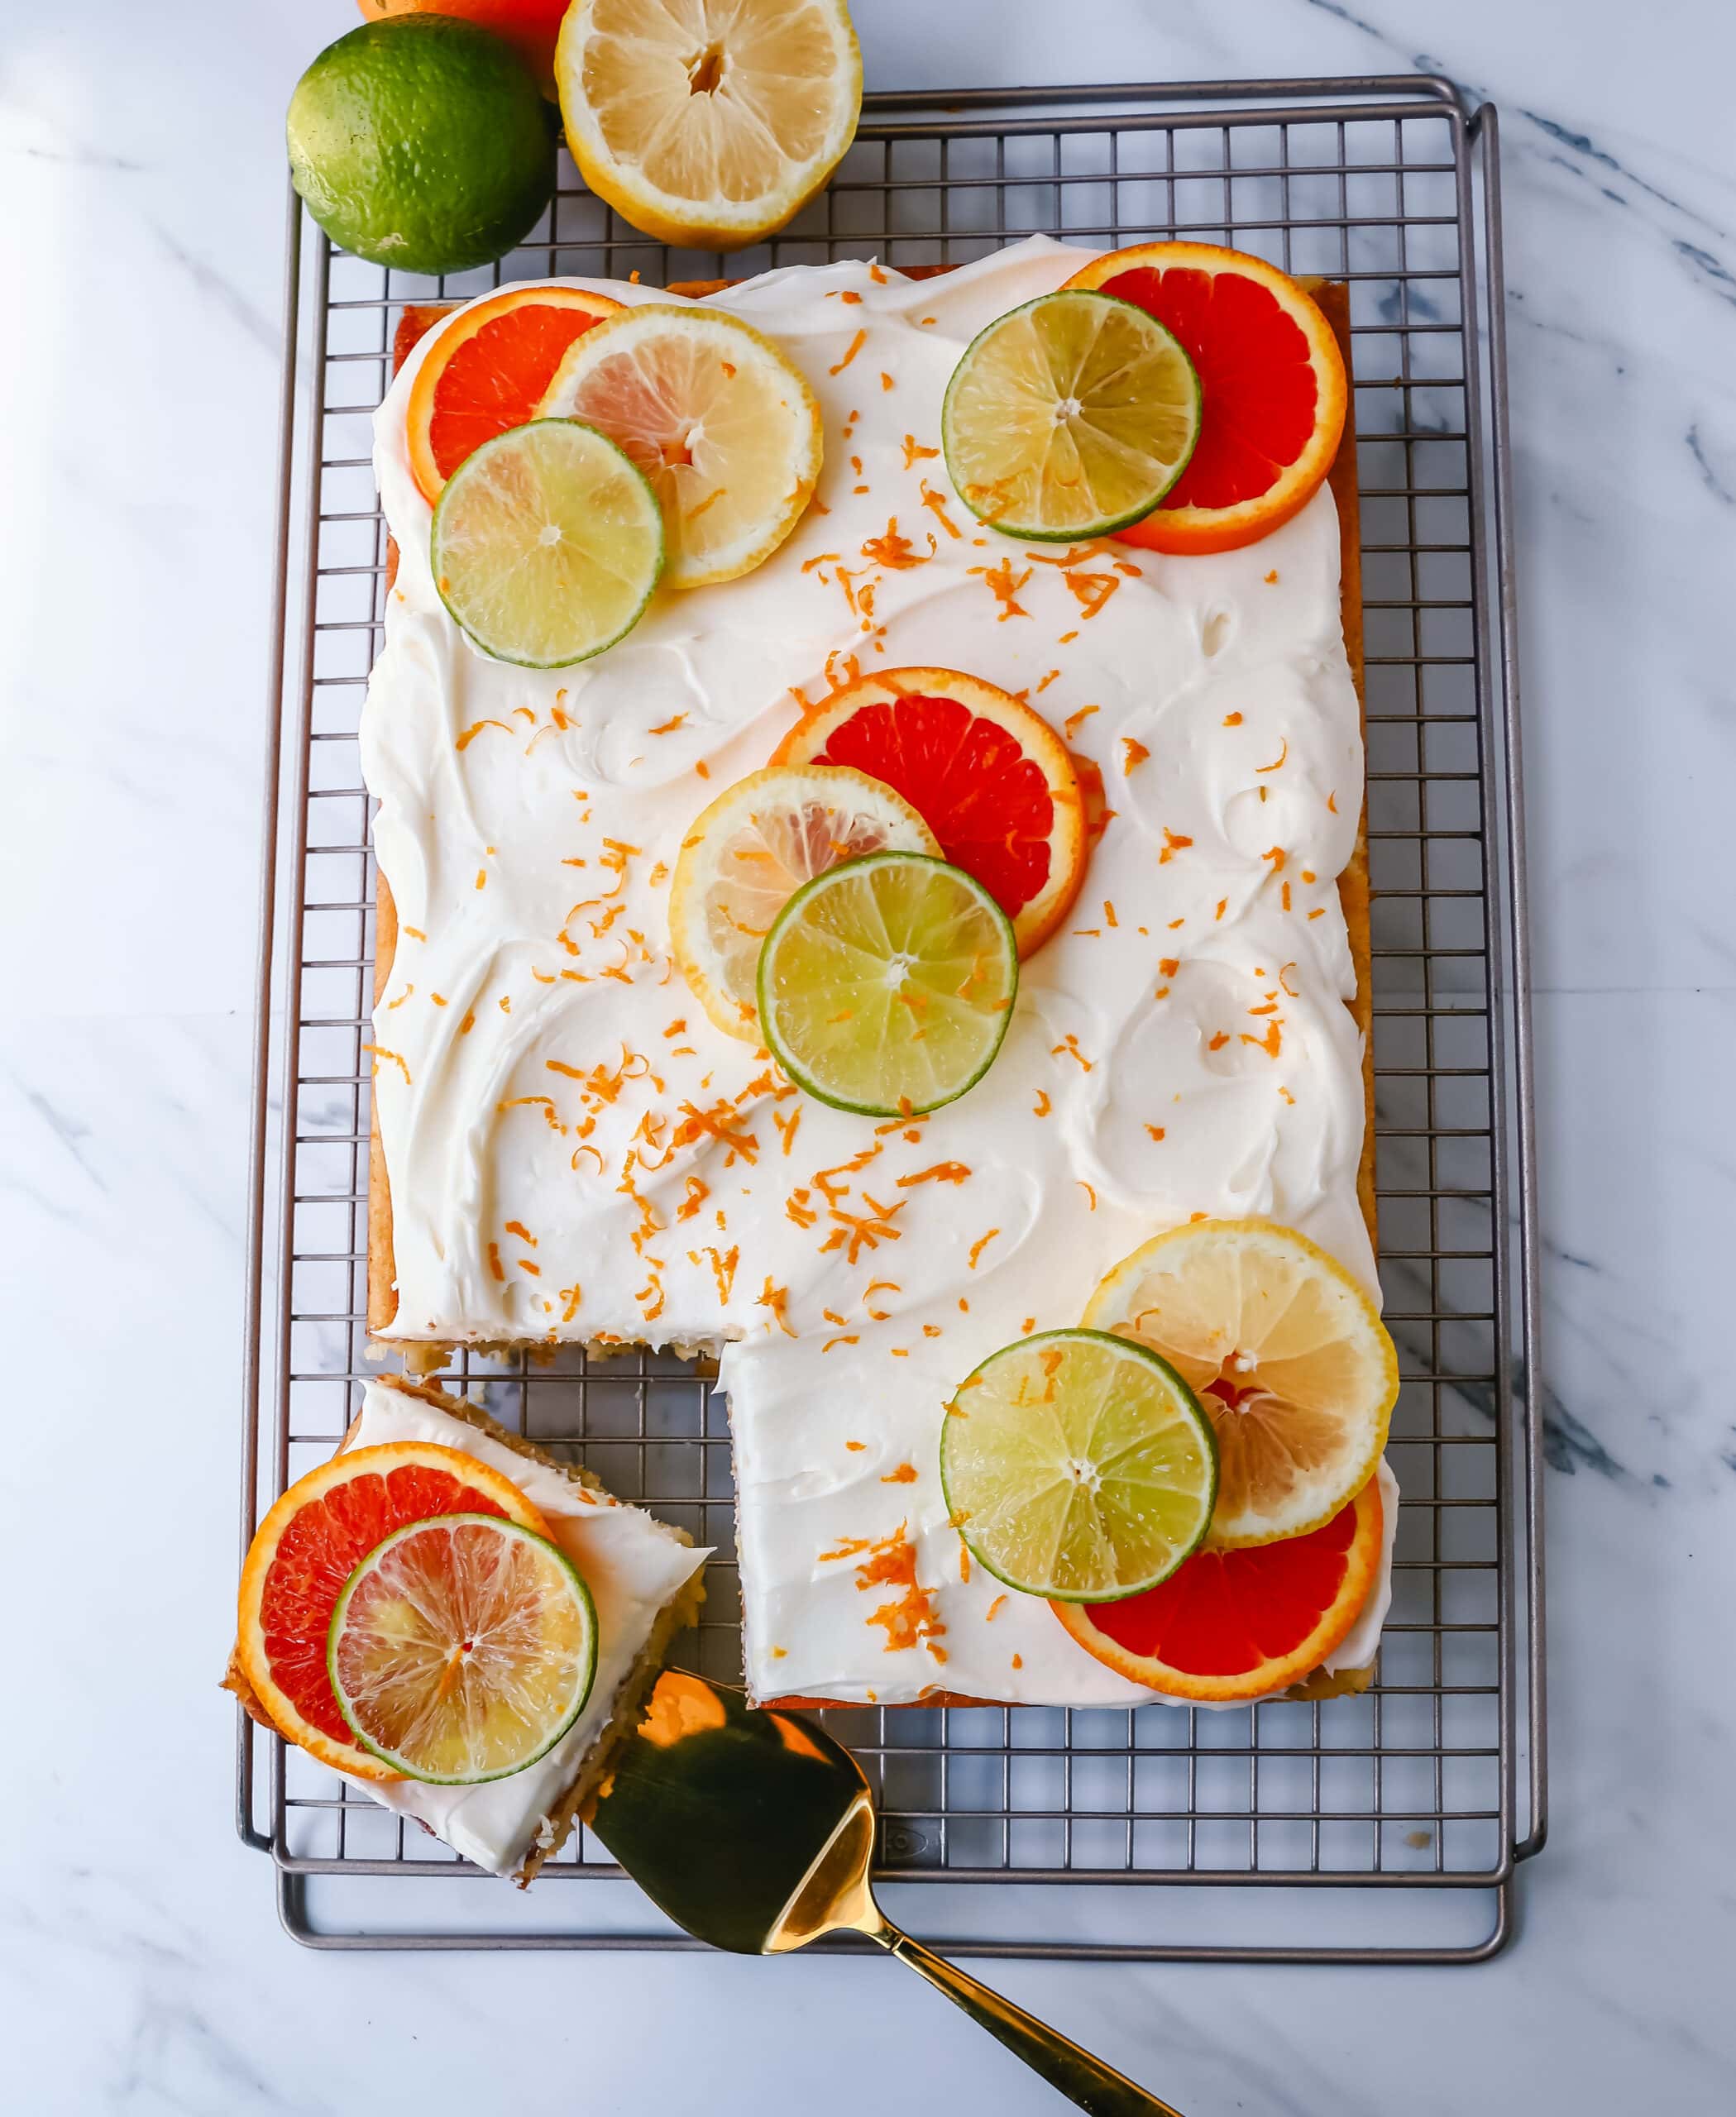 Citrus Sheet Cake made with fresh-squeezed orange, lemon, and lime juices in a moist, fluffy cake and topped with a creamy and silky homemade cream cheese frosting and topped with citrus slices. A beautiful Spring and Summer celebration cake! 